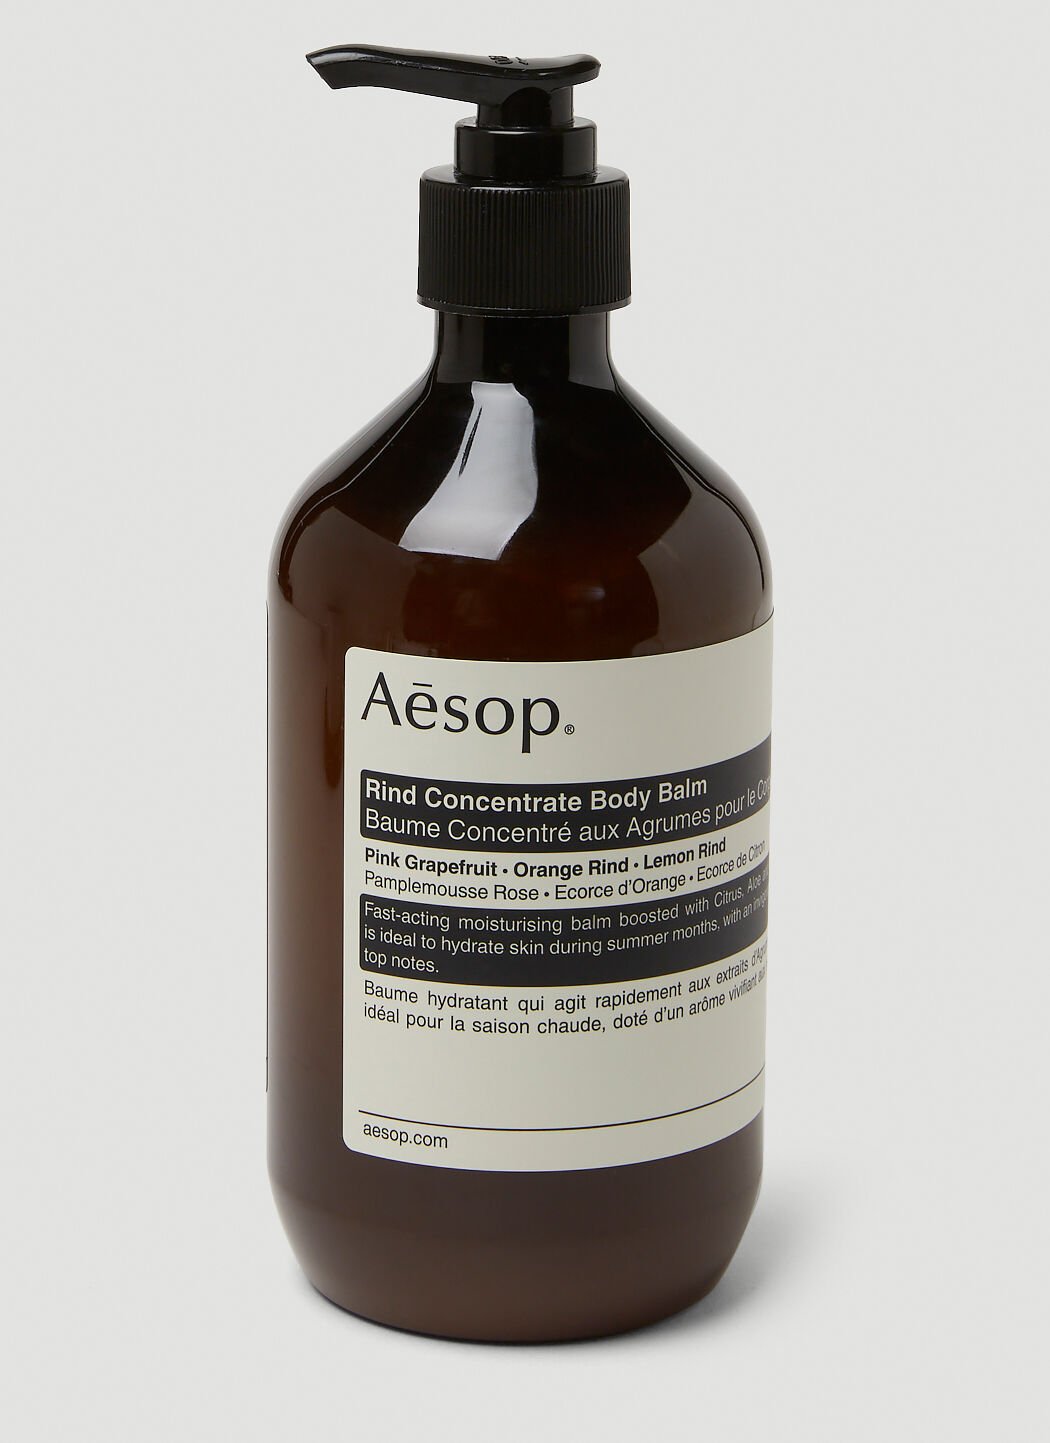 Aesop Rind Concentrate Body Balm Black sop0353001